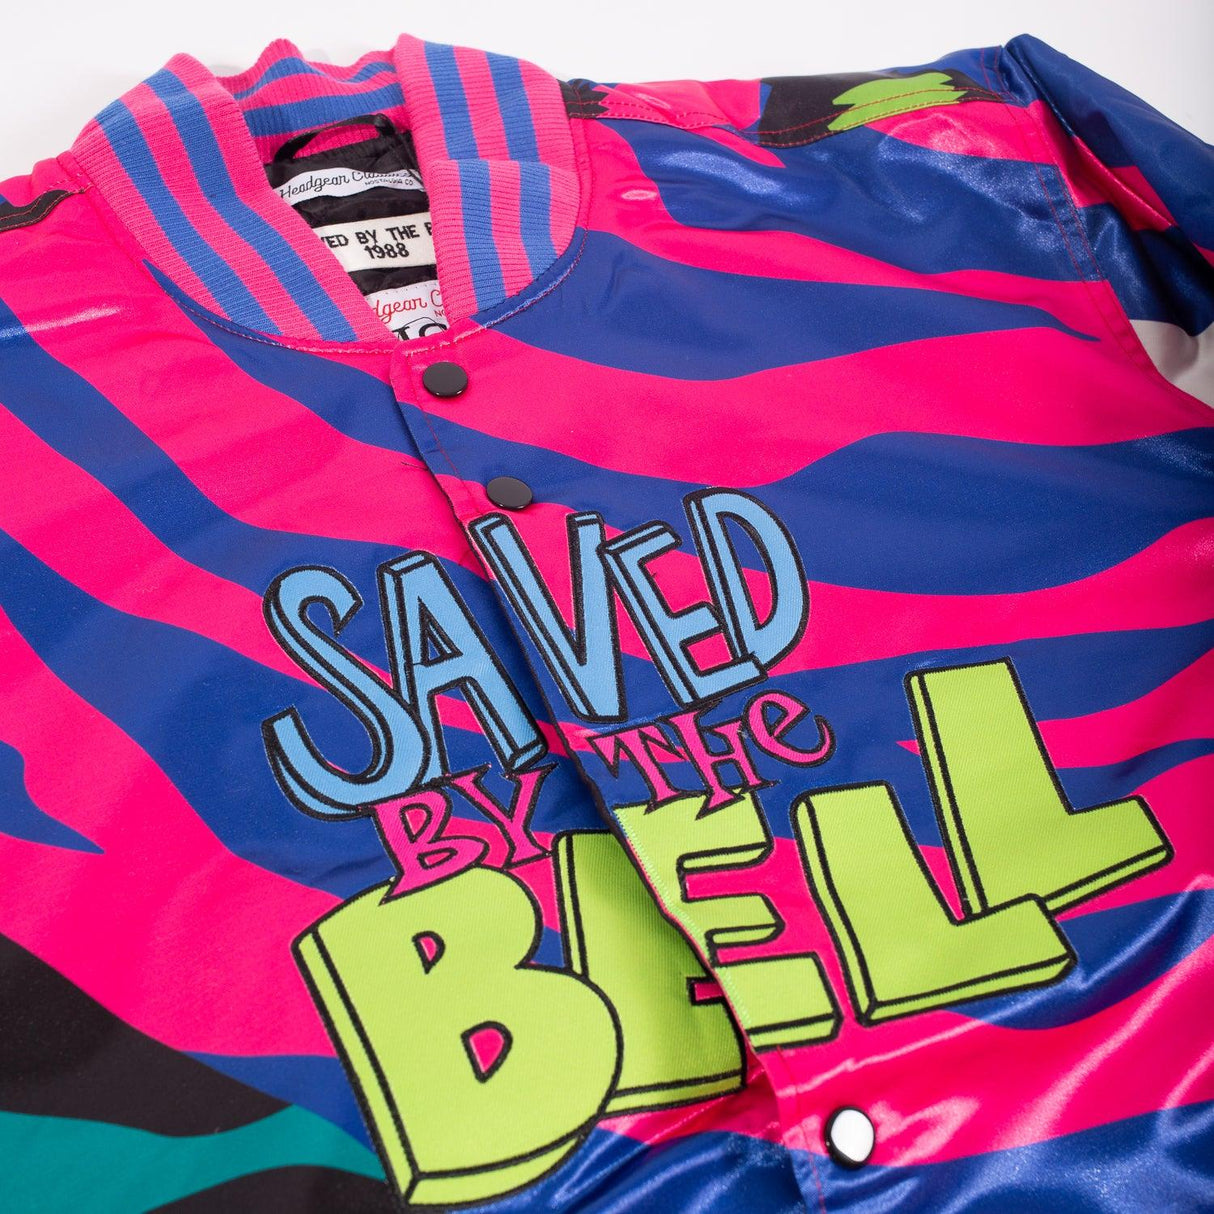 SAVED BY THE BELL SATIN JACKET - Allstarelite.com